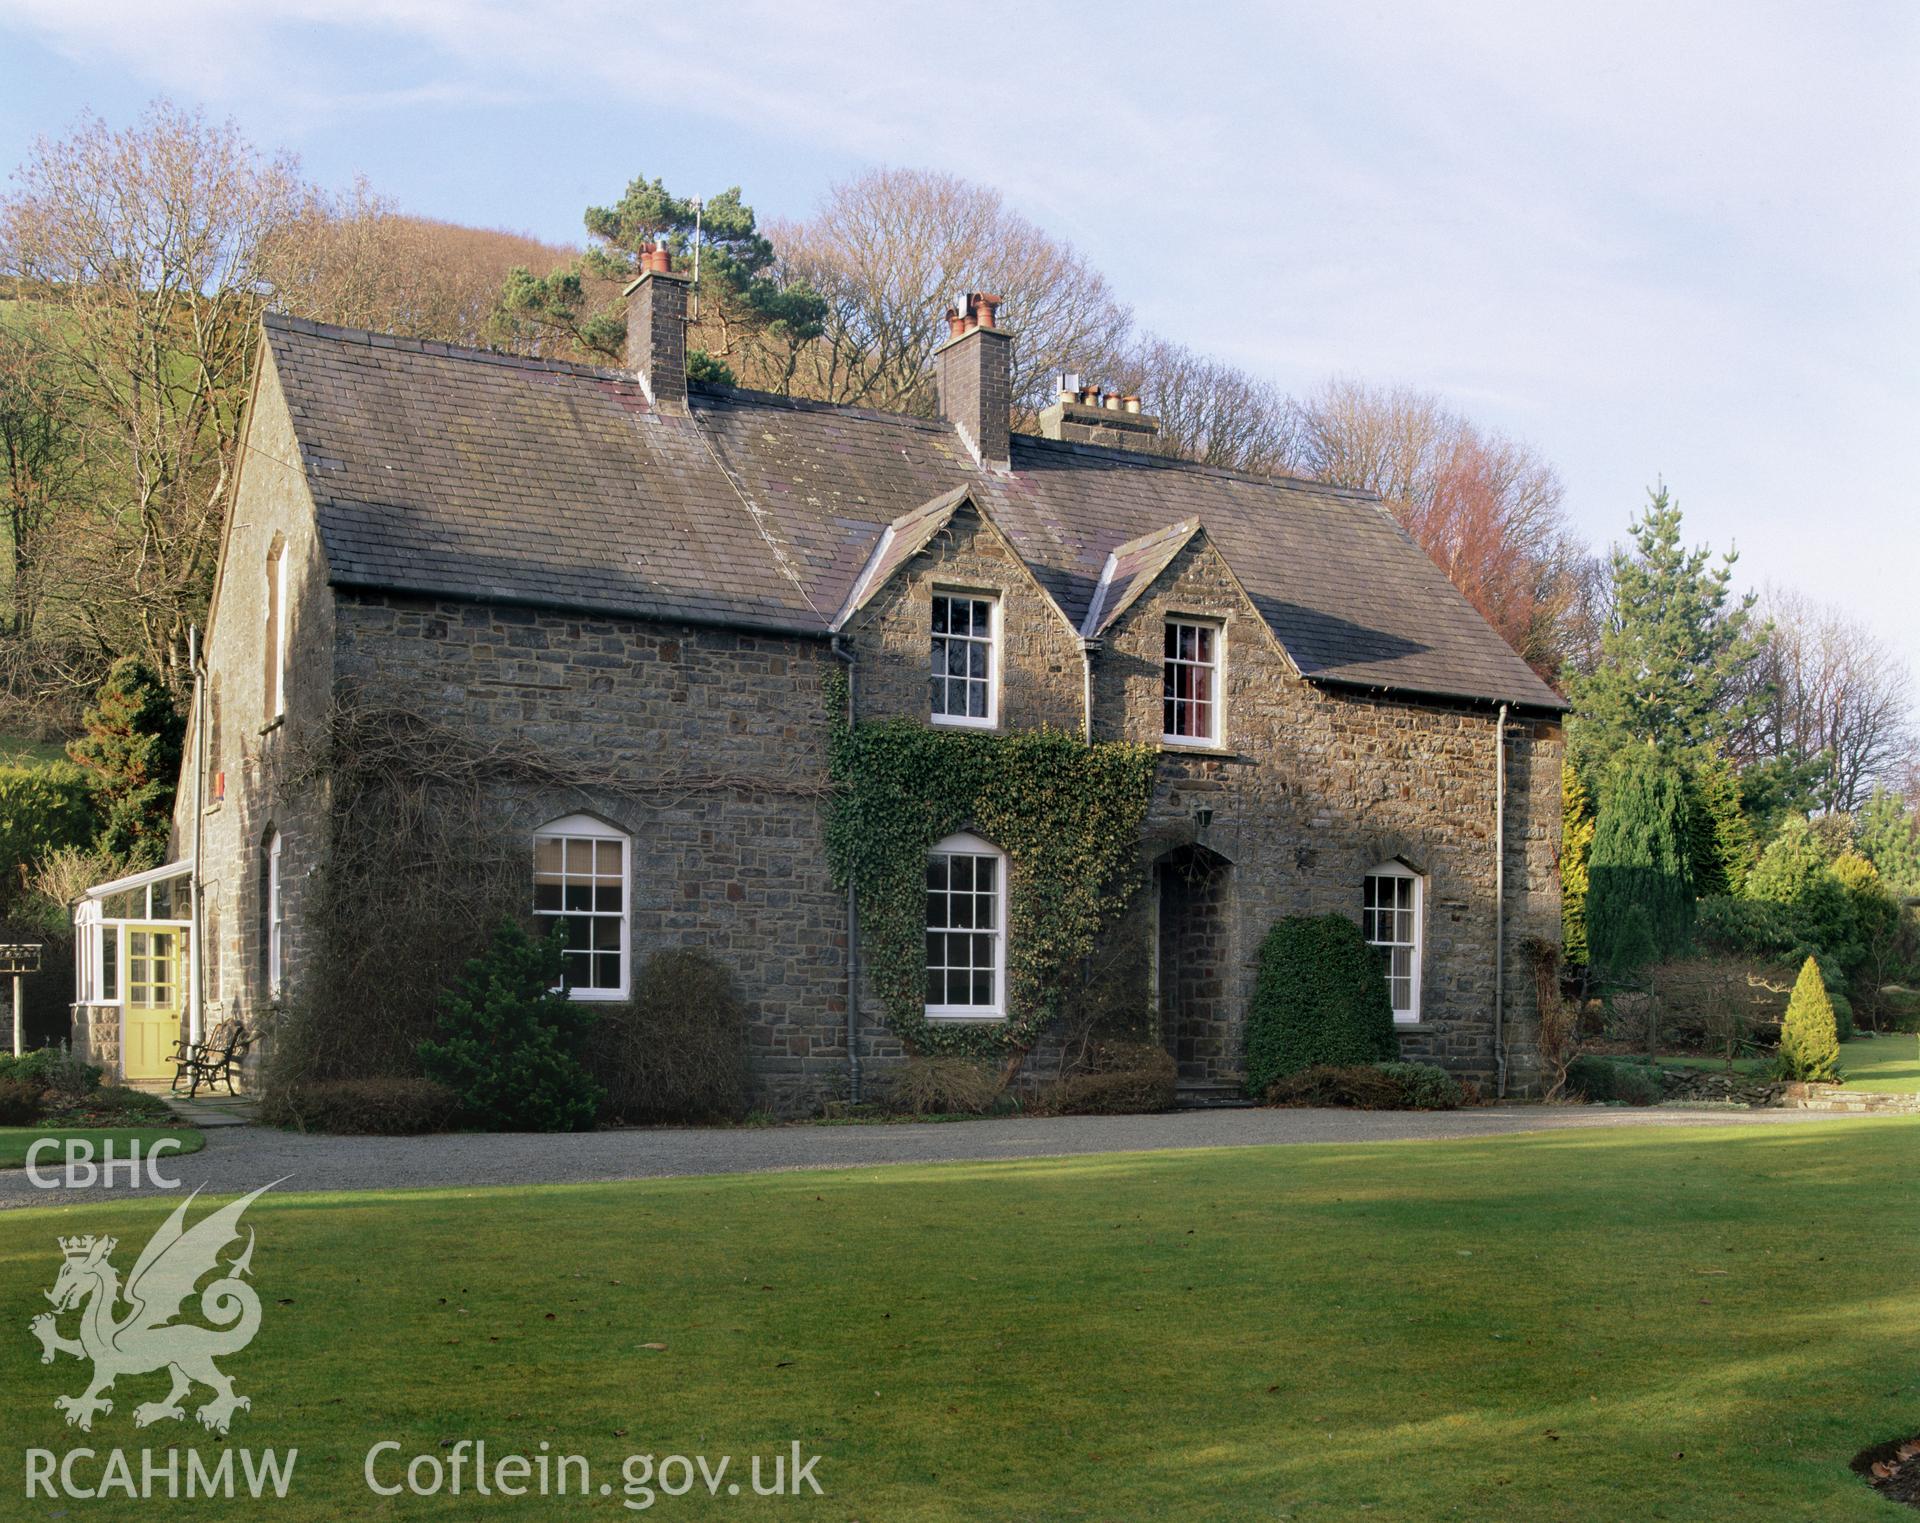 Colour transparency showing exterior view of  the Vicarage, Llanfihangel y Creuddyn, produced by Iain Wright, June 2004.